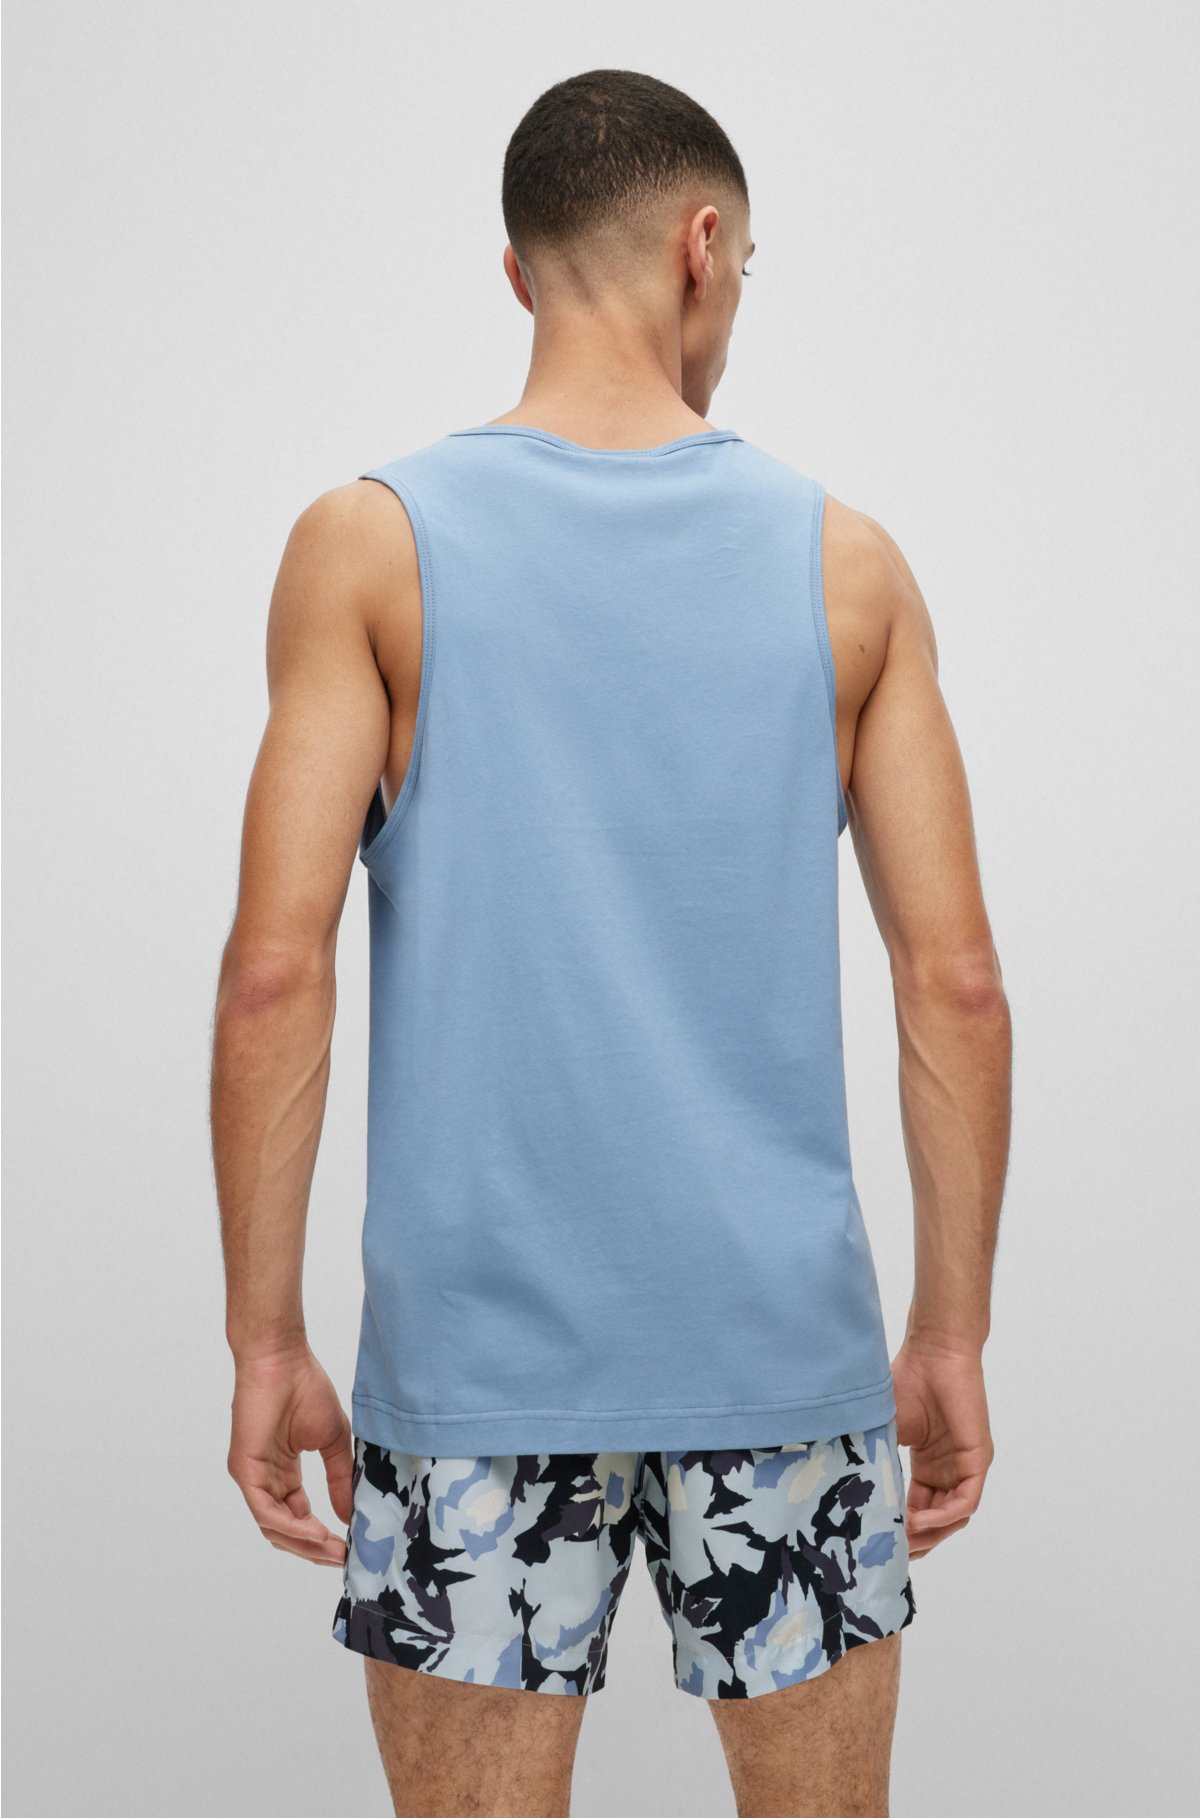 HUGO - Cotton tank top with red logo